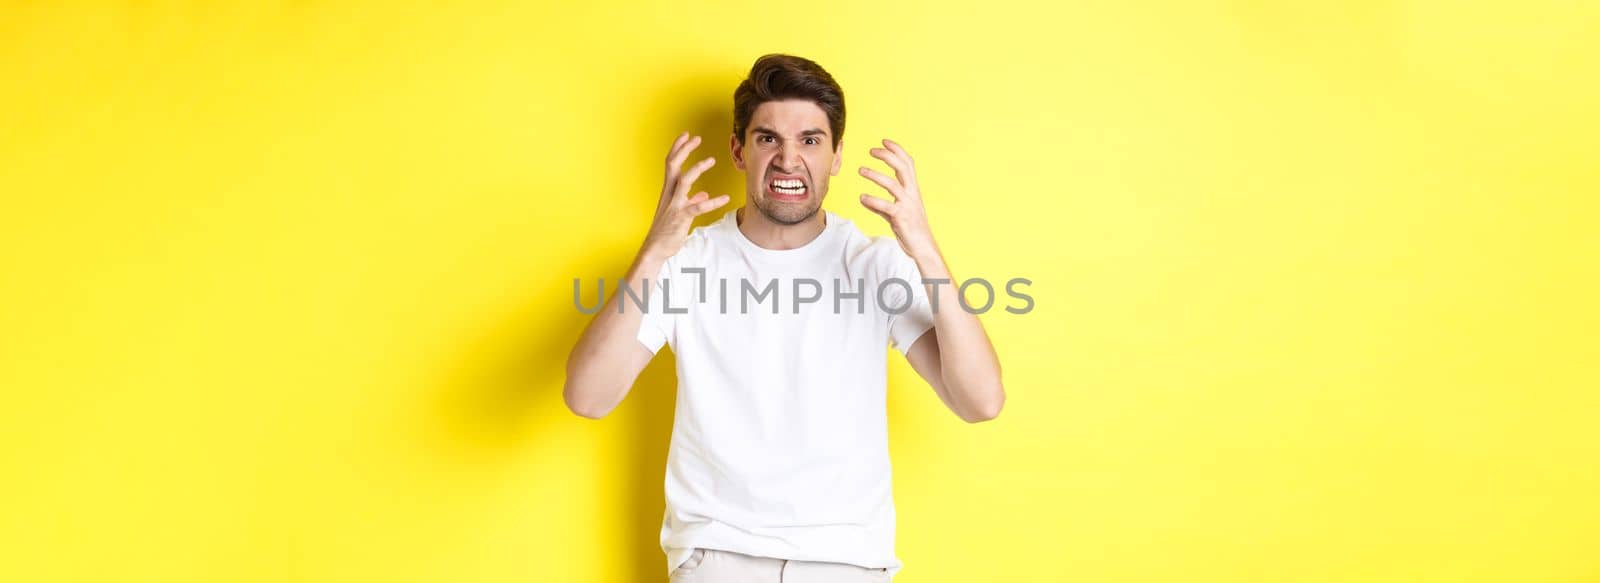 Angry man looking mad, grimacing and shaking hands furious, standing outraged against yellow background.